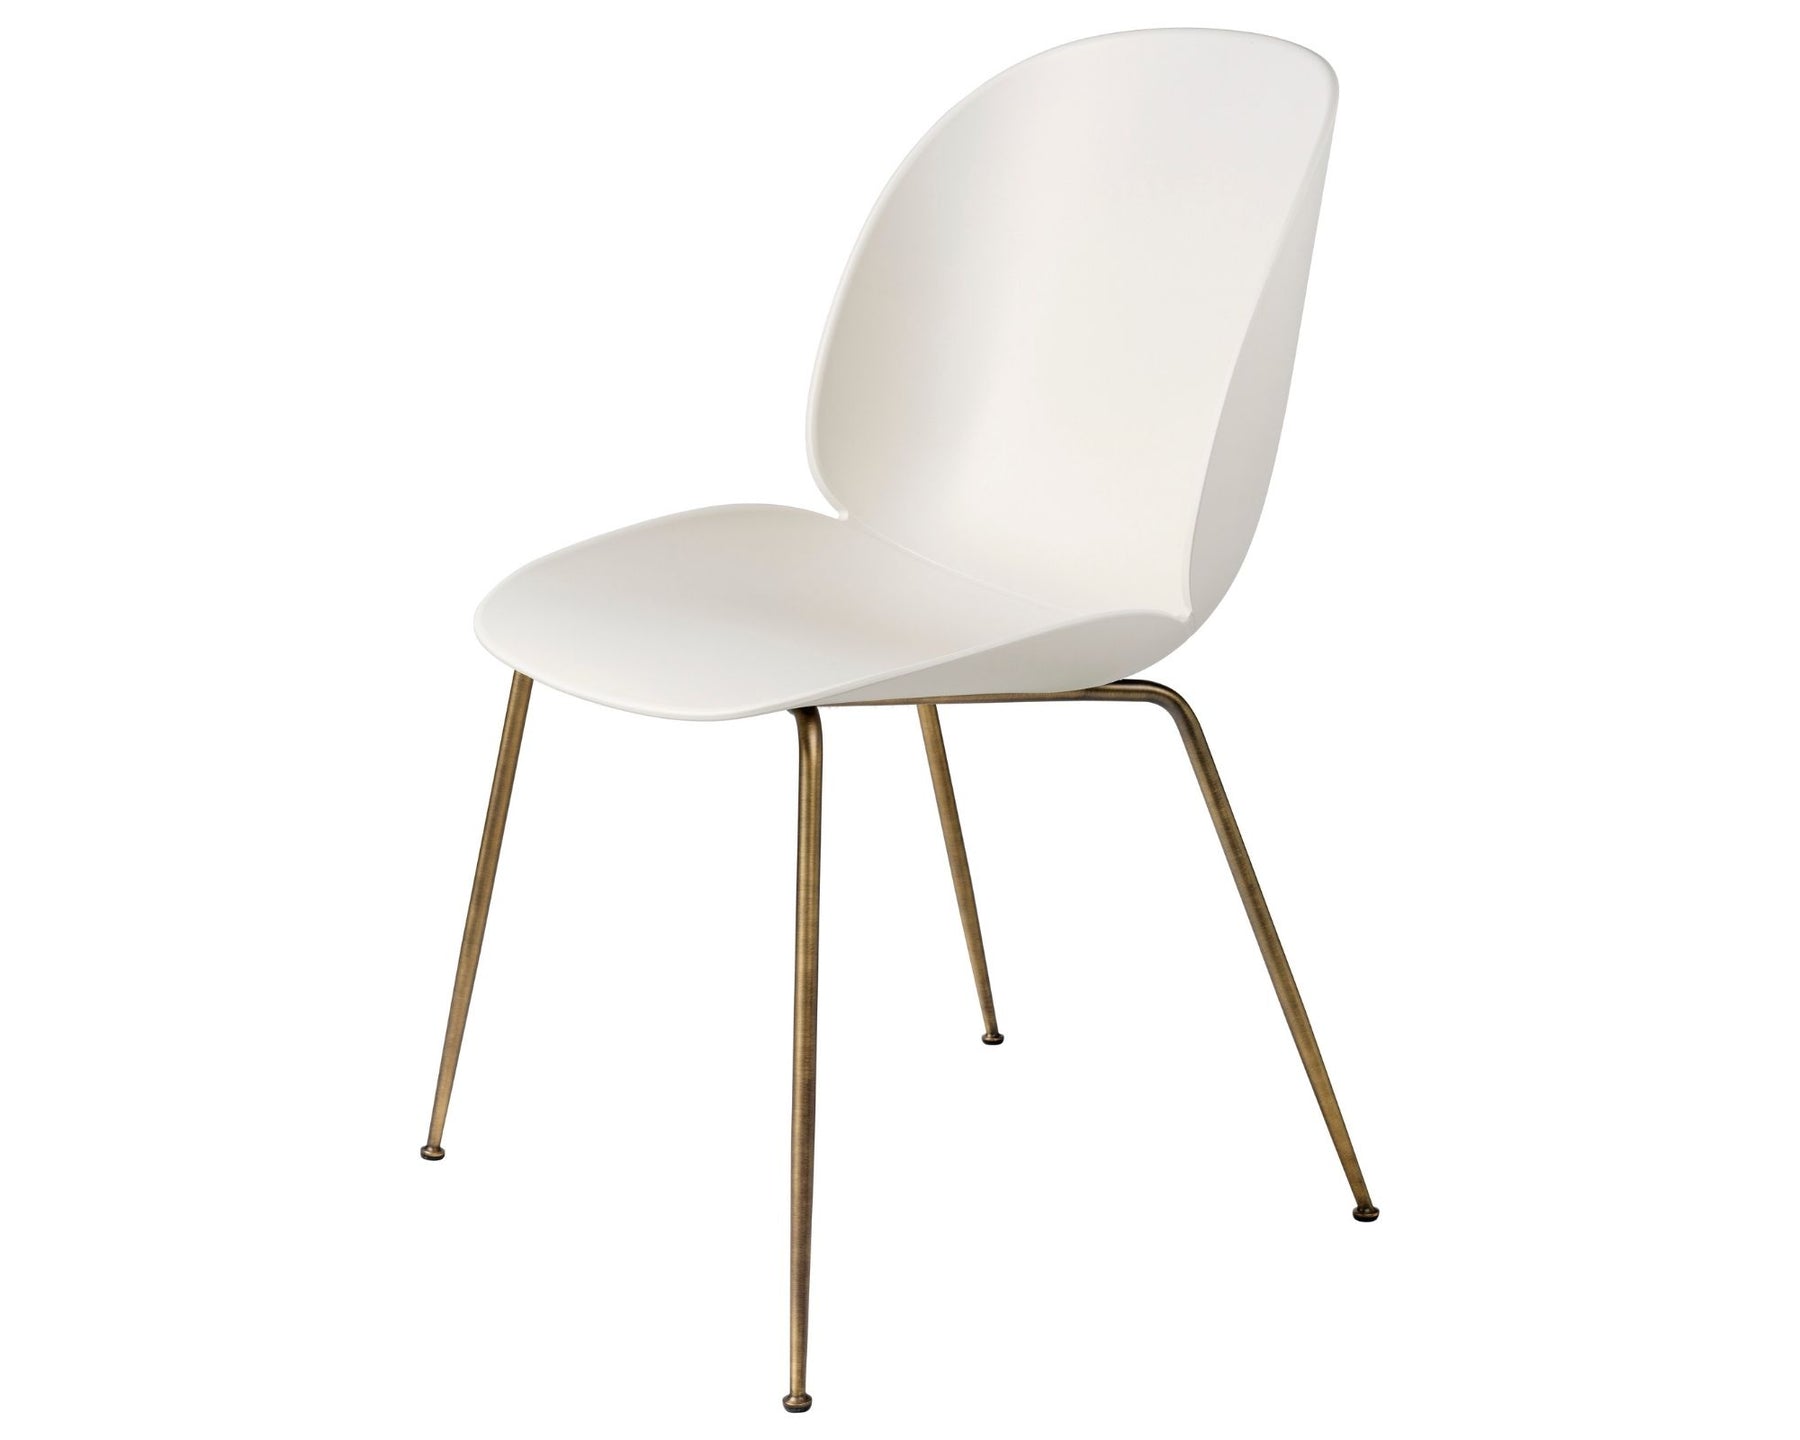 Alabaster White Dining Chair with Antique Brass Base | DSHOP